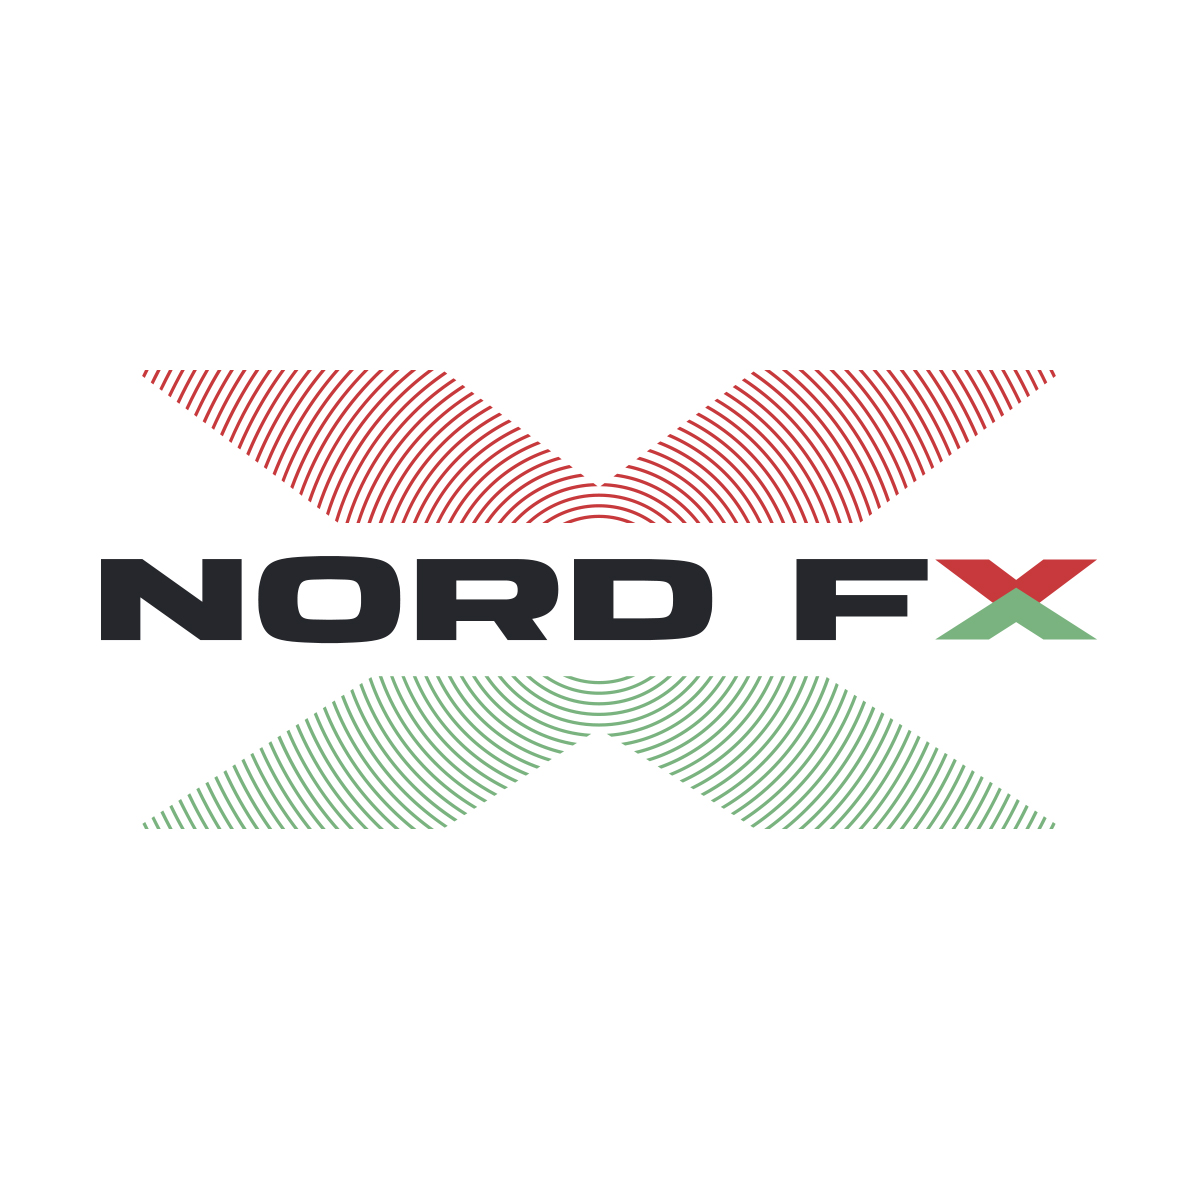 Super Lottery: NordFX Gives Away Prizes to Traders